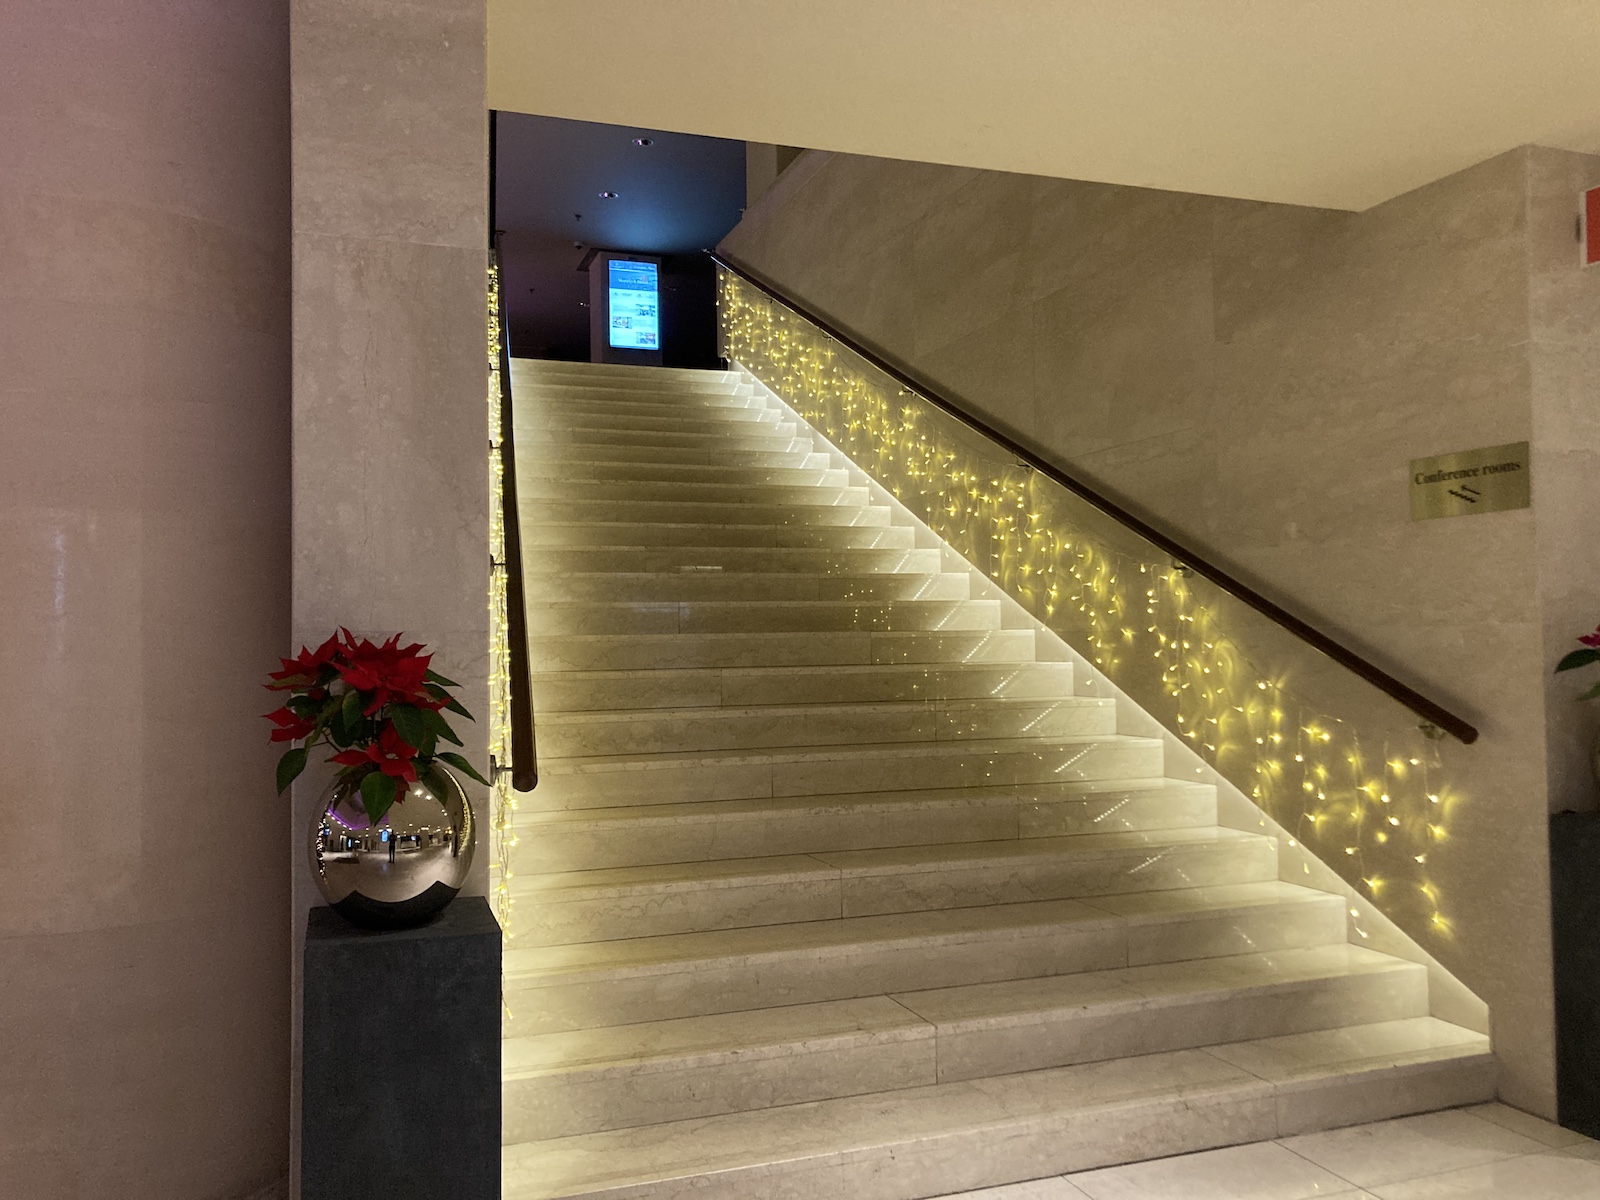 Image of stairs from Sheraton Stockholm Lobby up to meeting rooms.